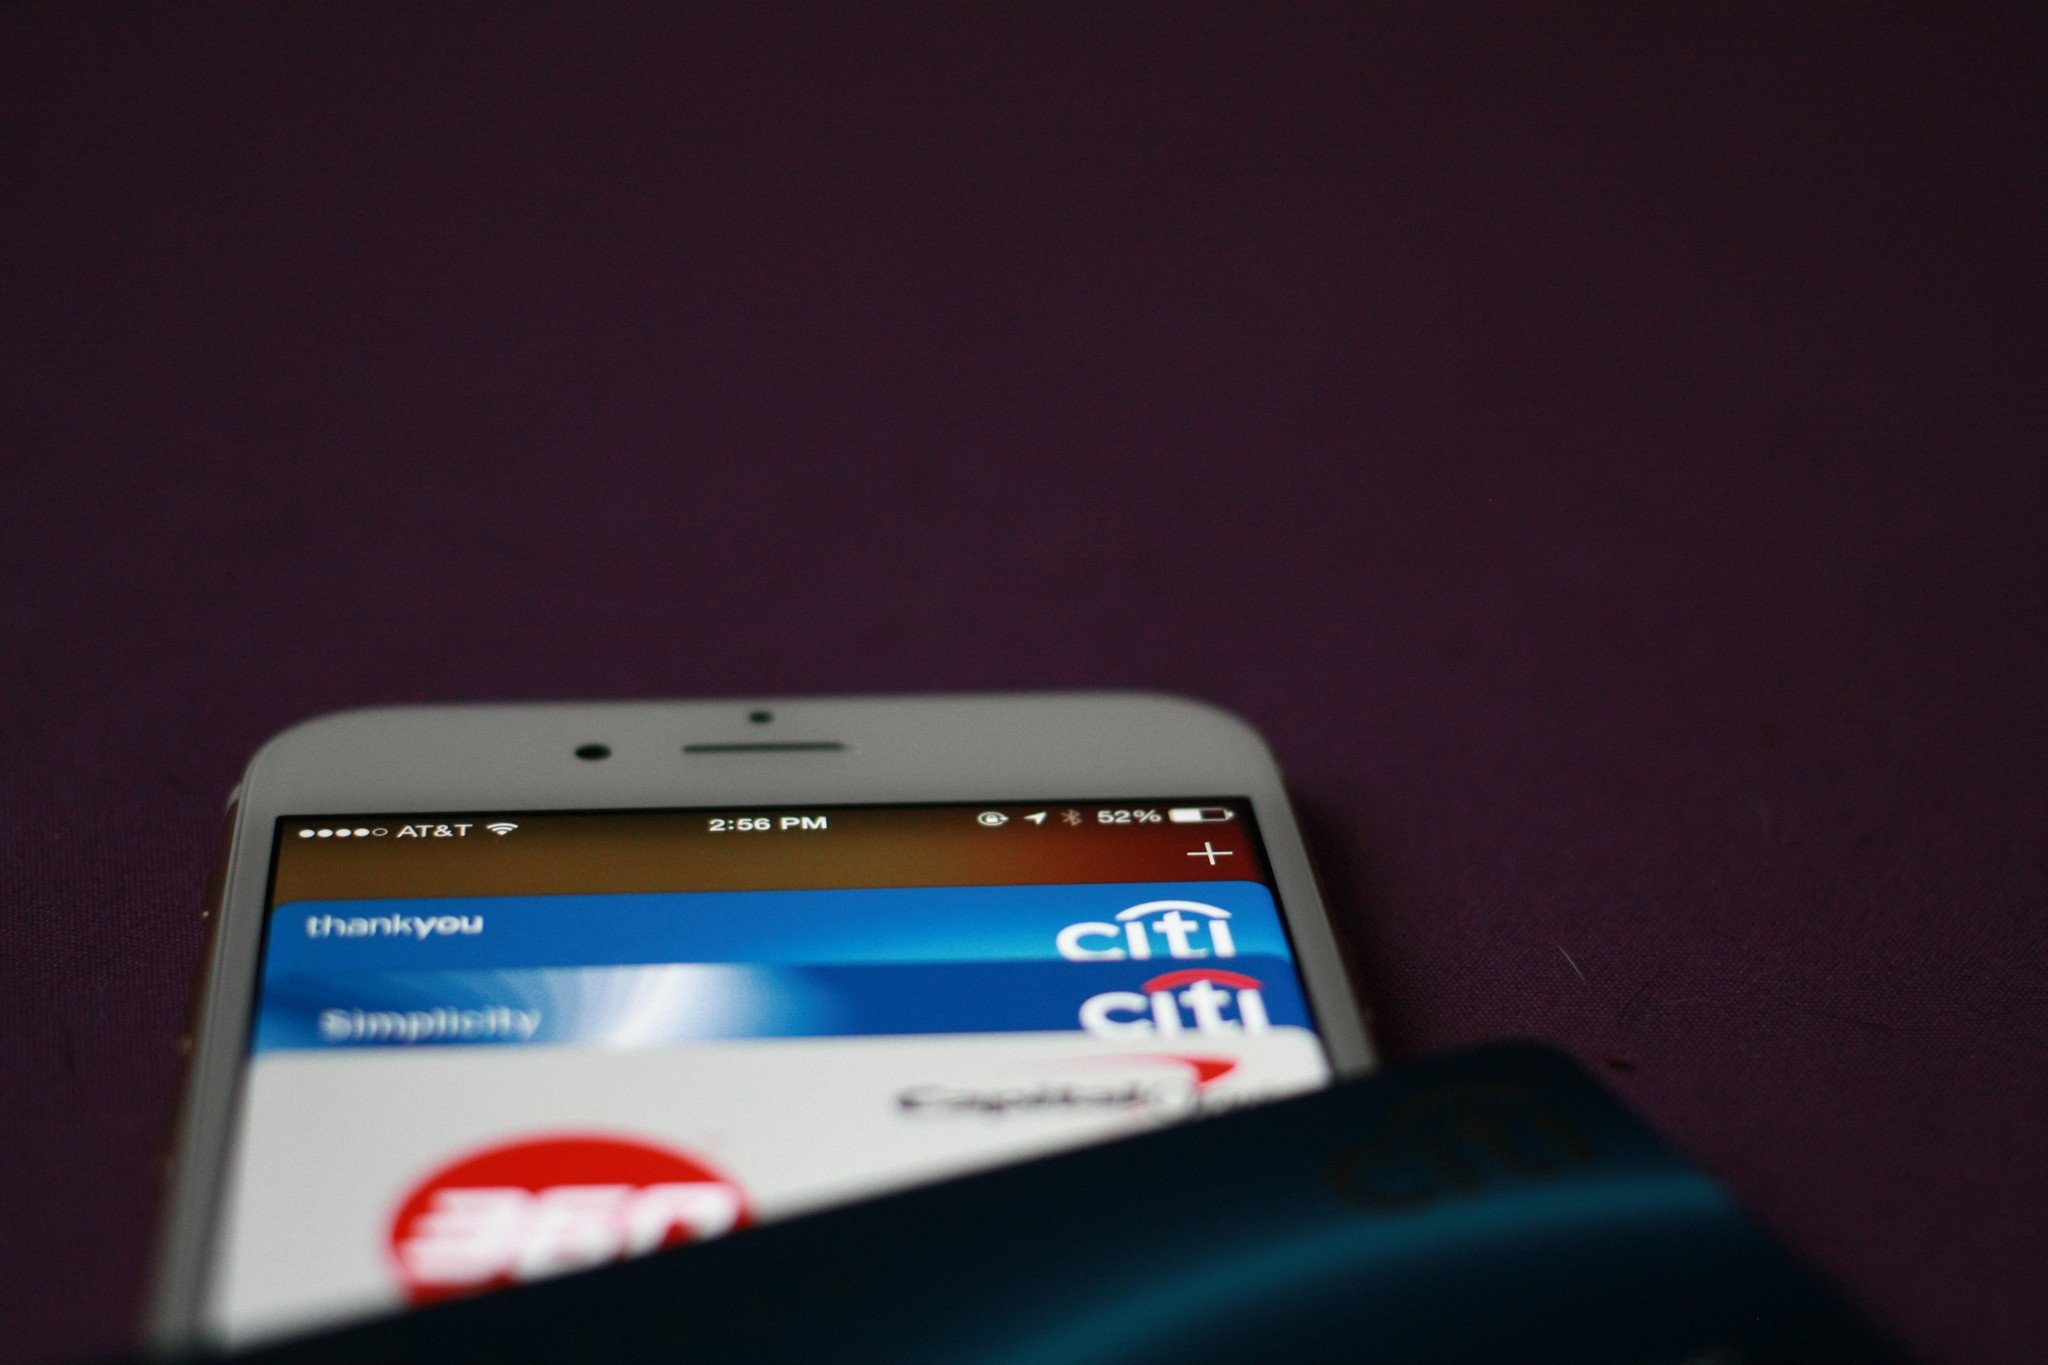 How to add a credit or debit card to Apple Pay